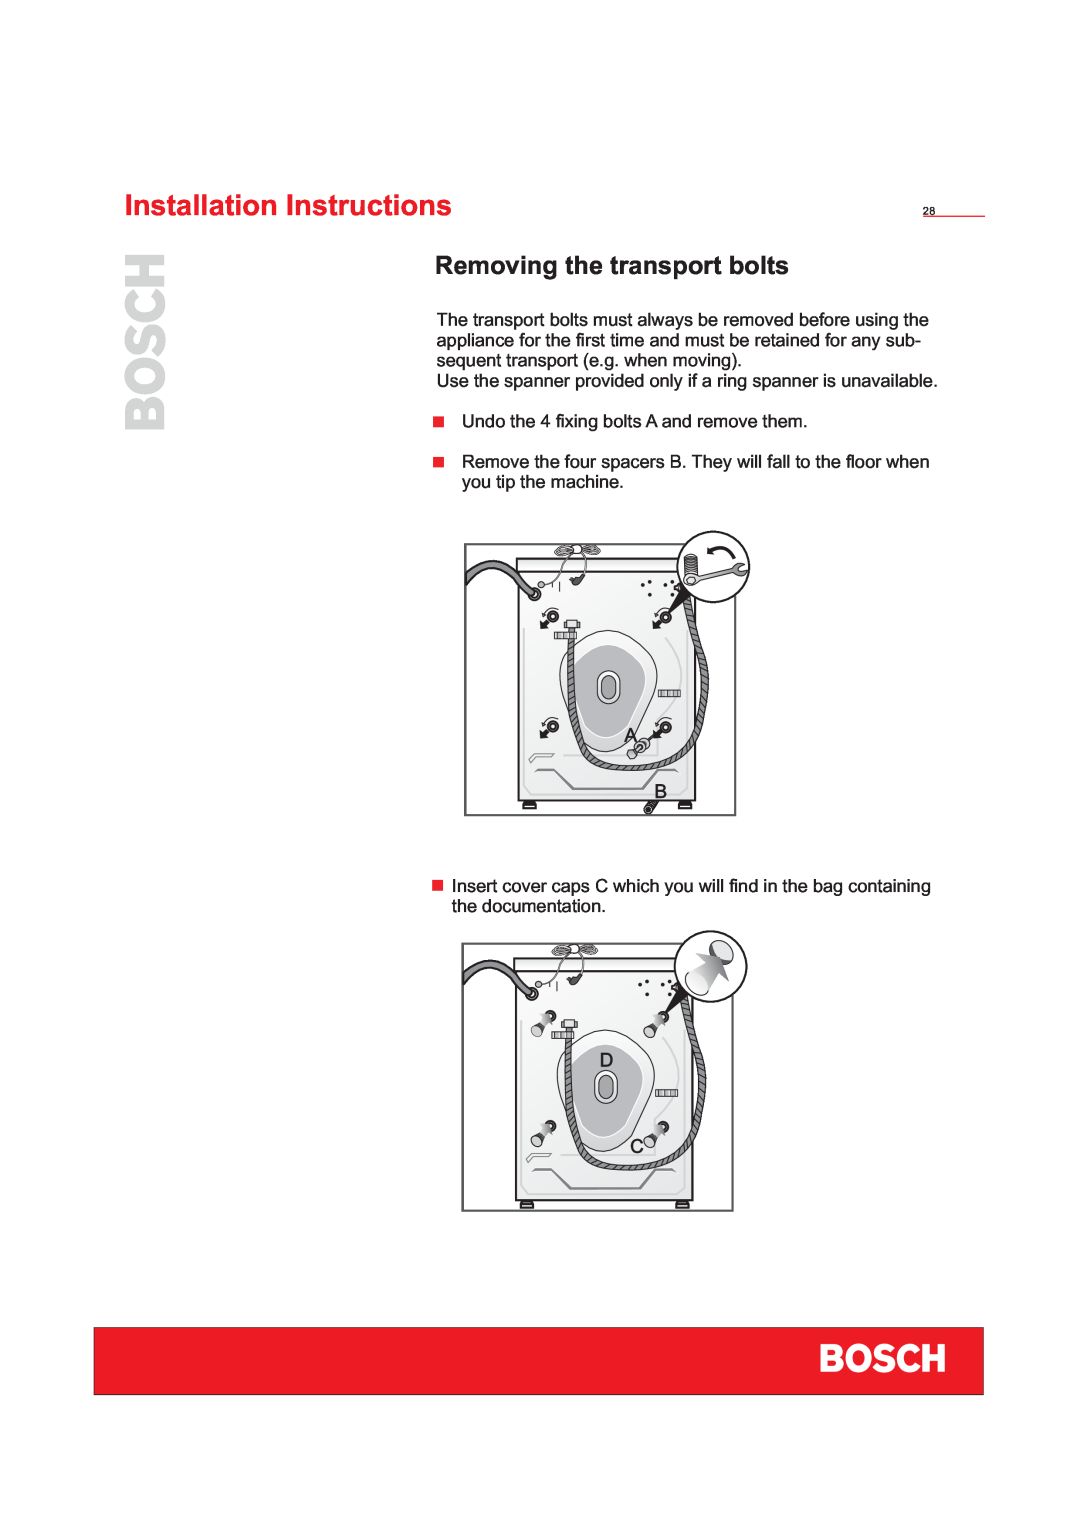 Bosch Appliances WFD50818 installation instructions Removing the transport bolts, Installation Instructions 